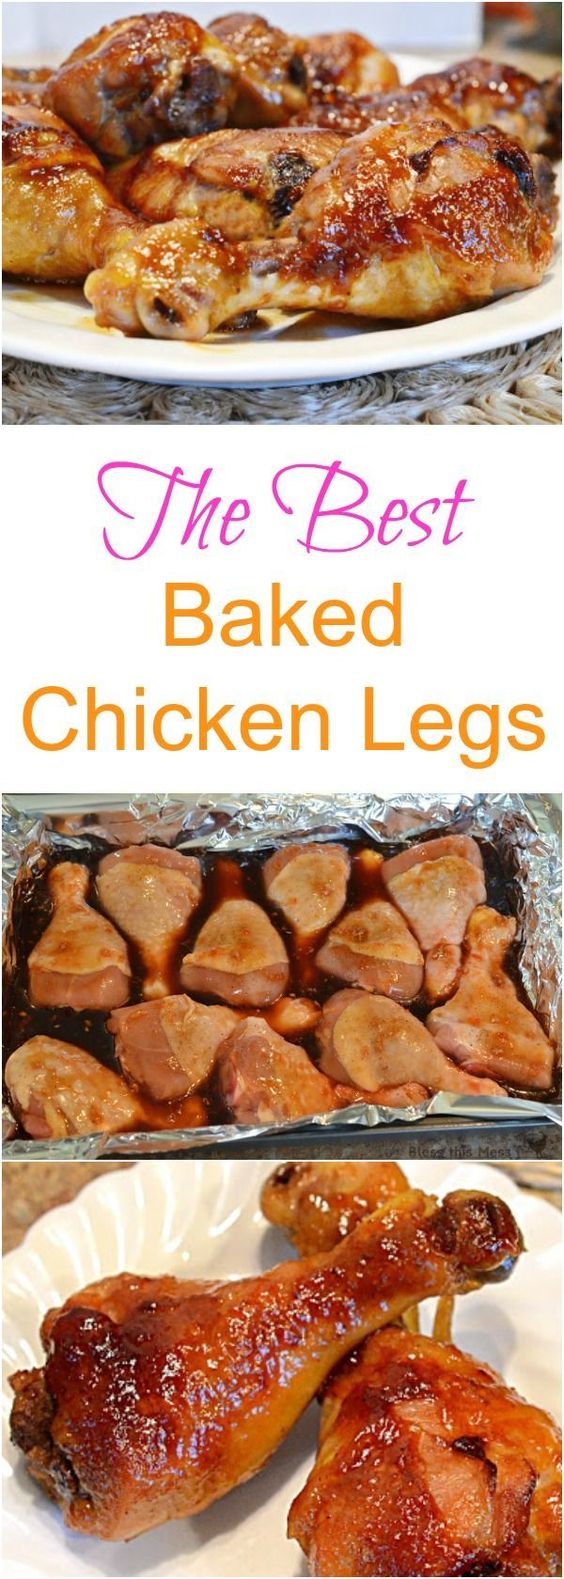 The Best Baked Chicken Legs | Angie's Recipes